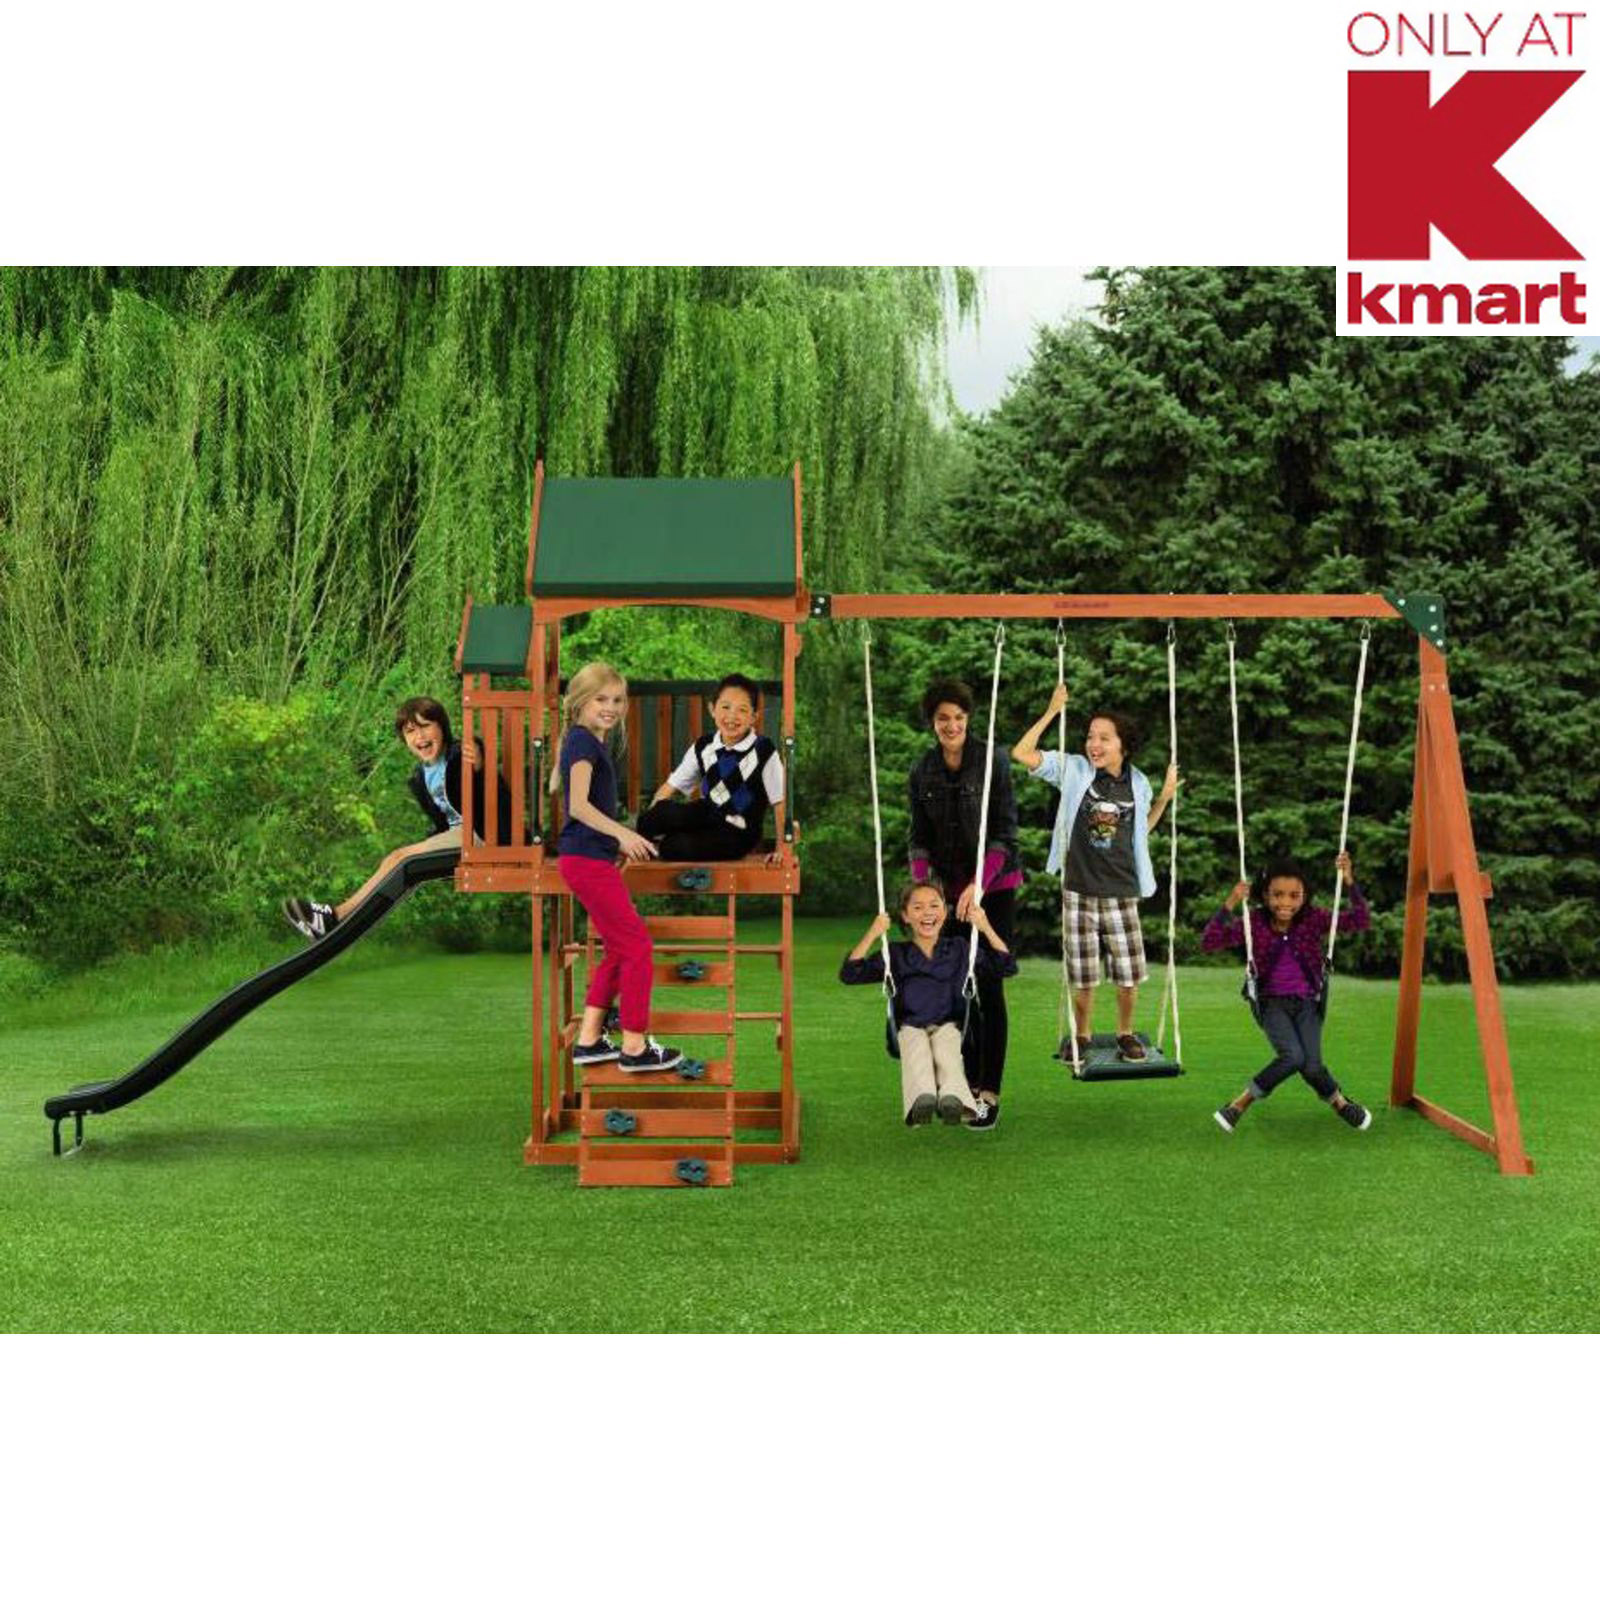 Outdoor Living Outdoor Play Swing Sets & Accessories 82